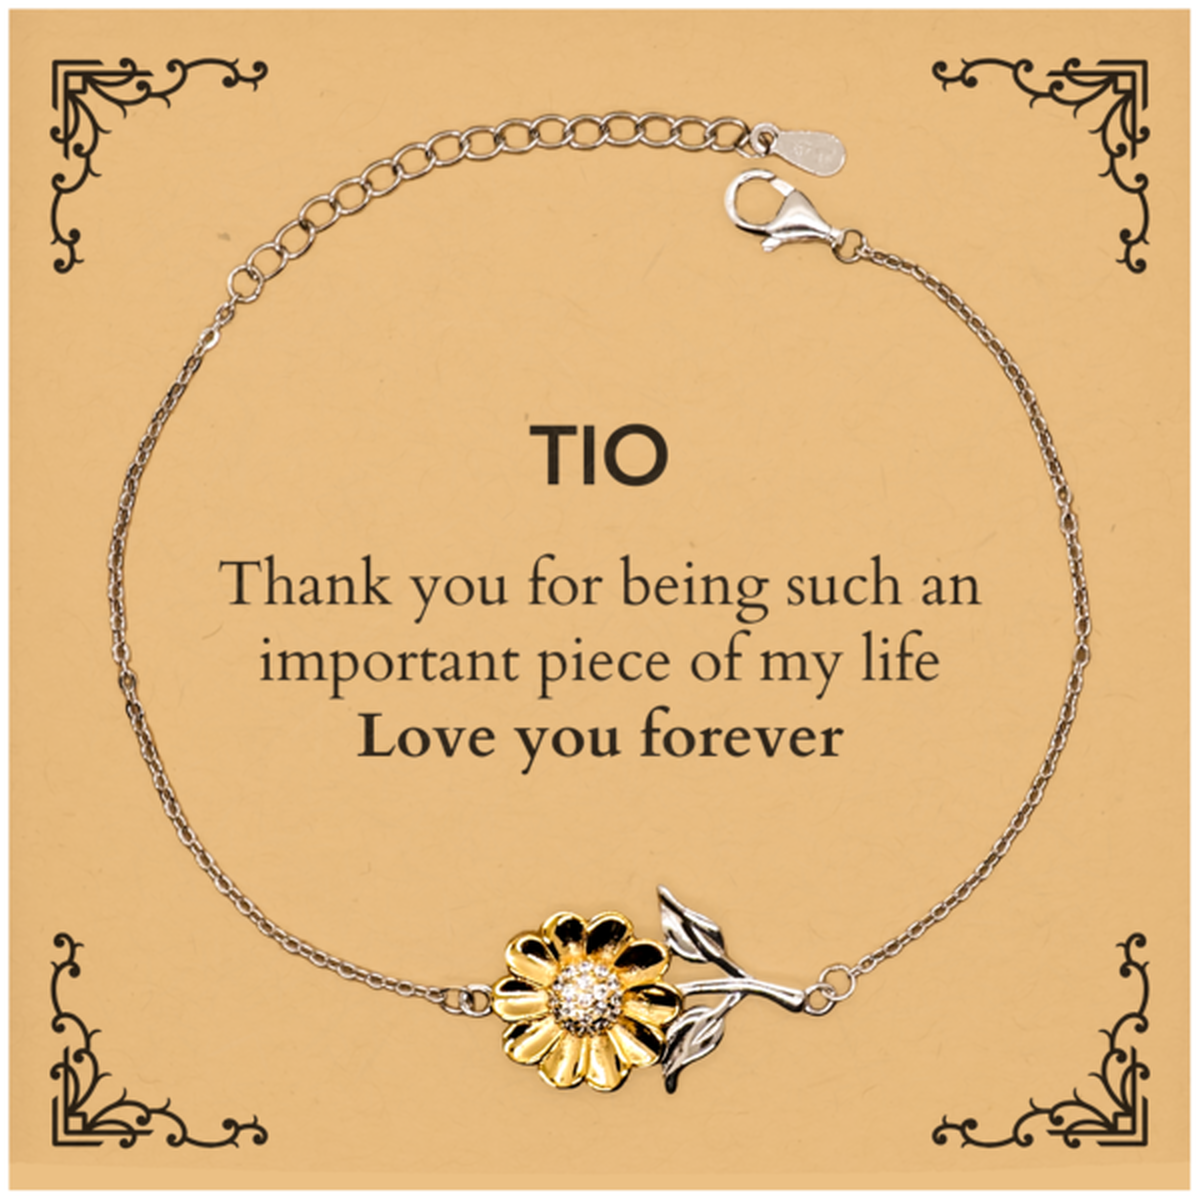 Appropriate Tio Sunflower Bracelet Epic Birthday Gifts for Tio Thank you for being such an important piece of my life Tio Christmas Mothers Fathers Day